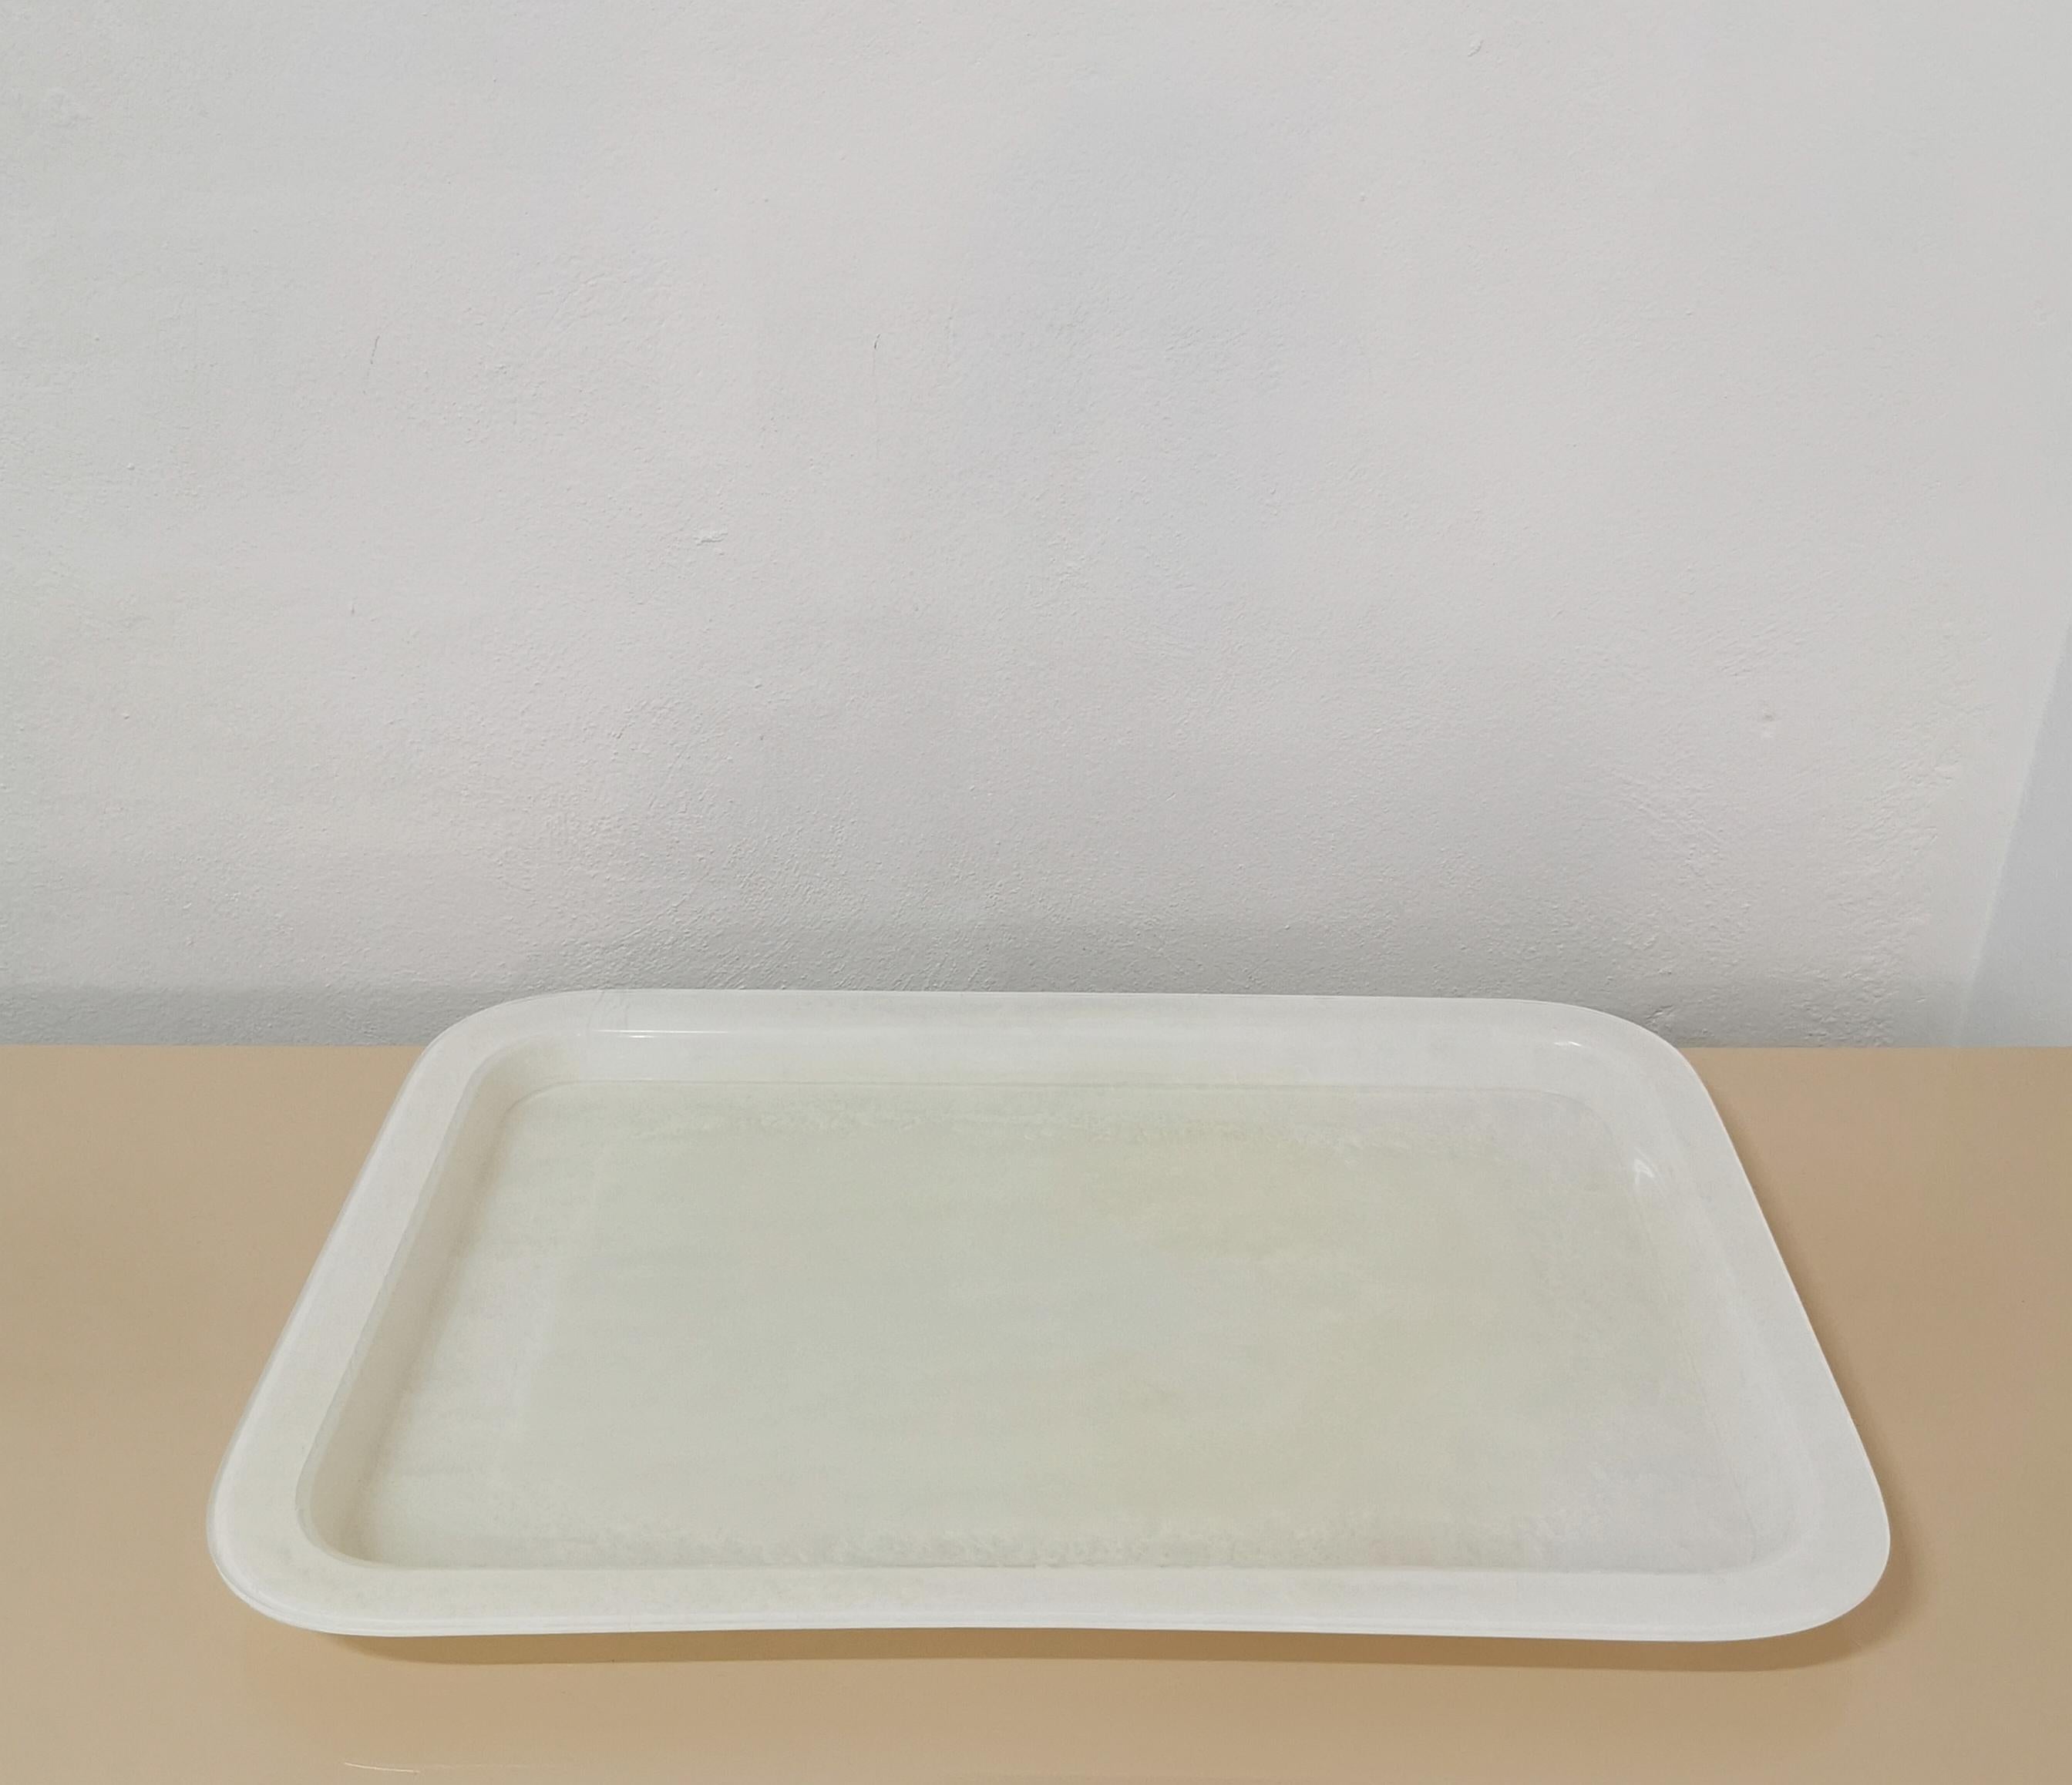 Midcentury Modern Tray Table Serving Piece Rectangular White Lucite Italy 1970s For Sale 5